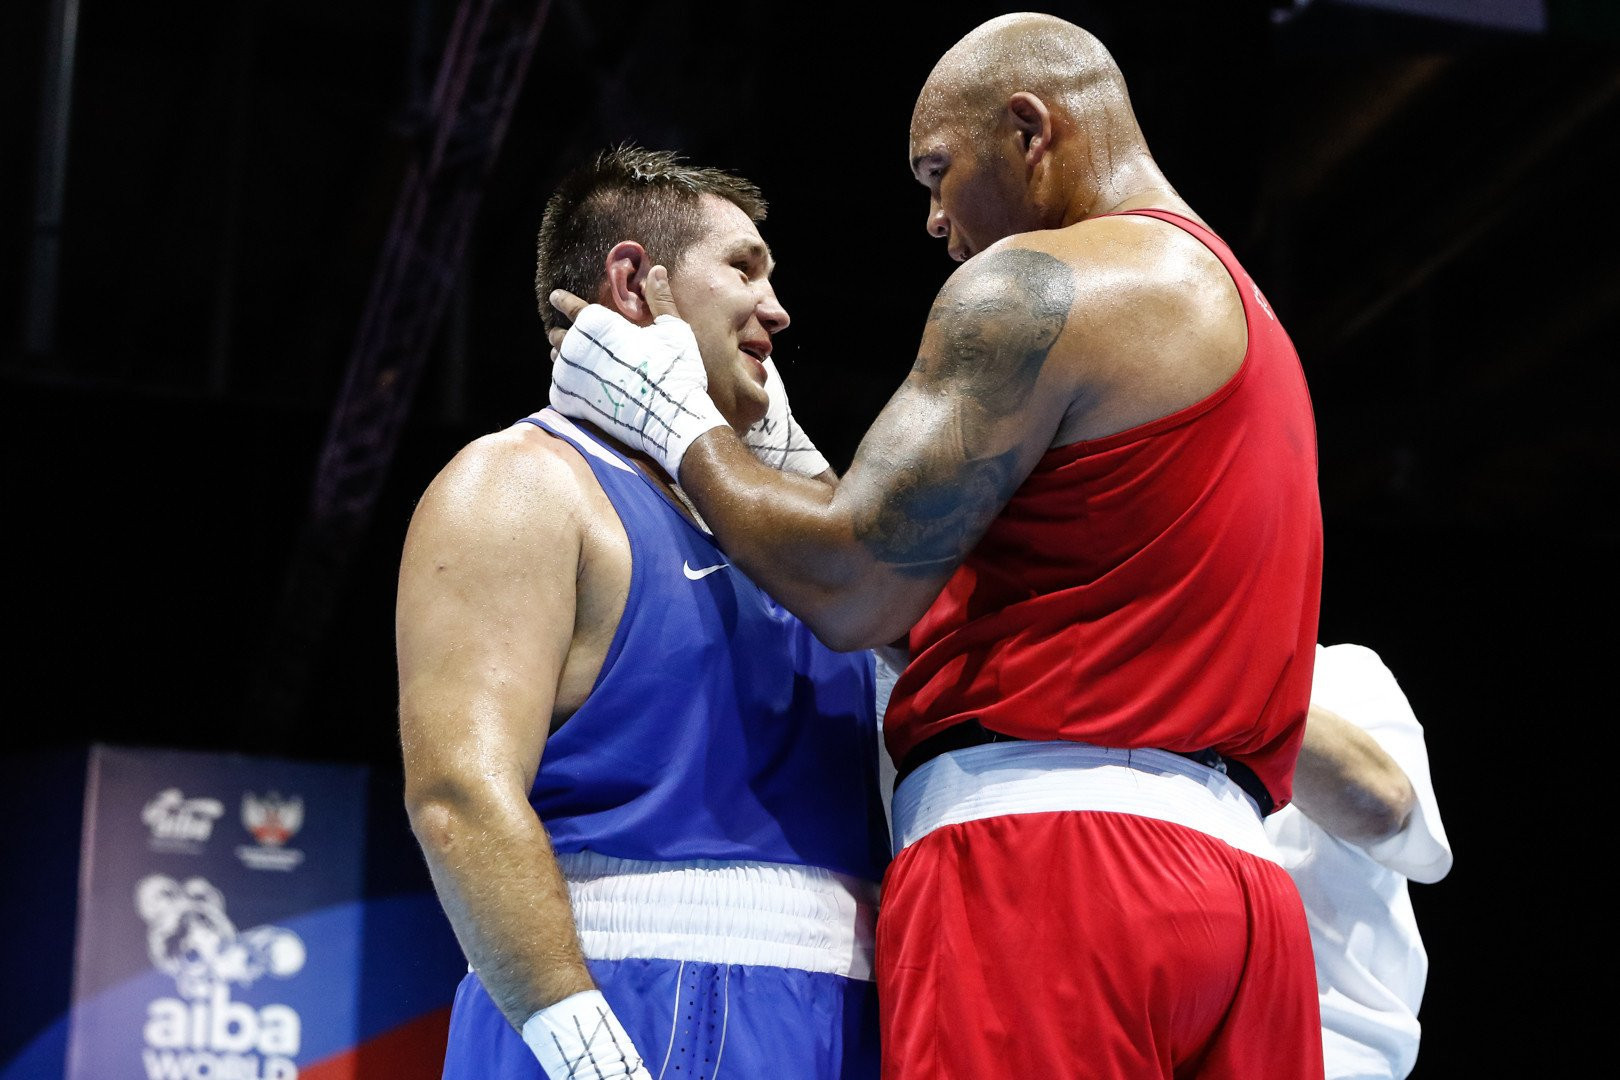 Frazer Clarke of Britain had his quarter-final victory against Maksim Babanin of Russia overturned at the Men's World Boxing Championships ©AIBA